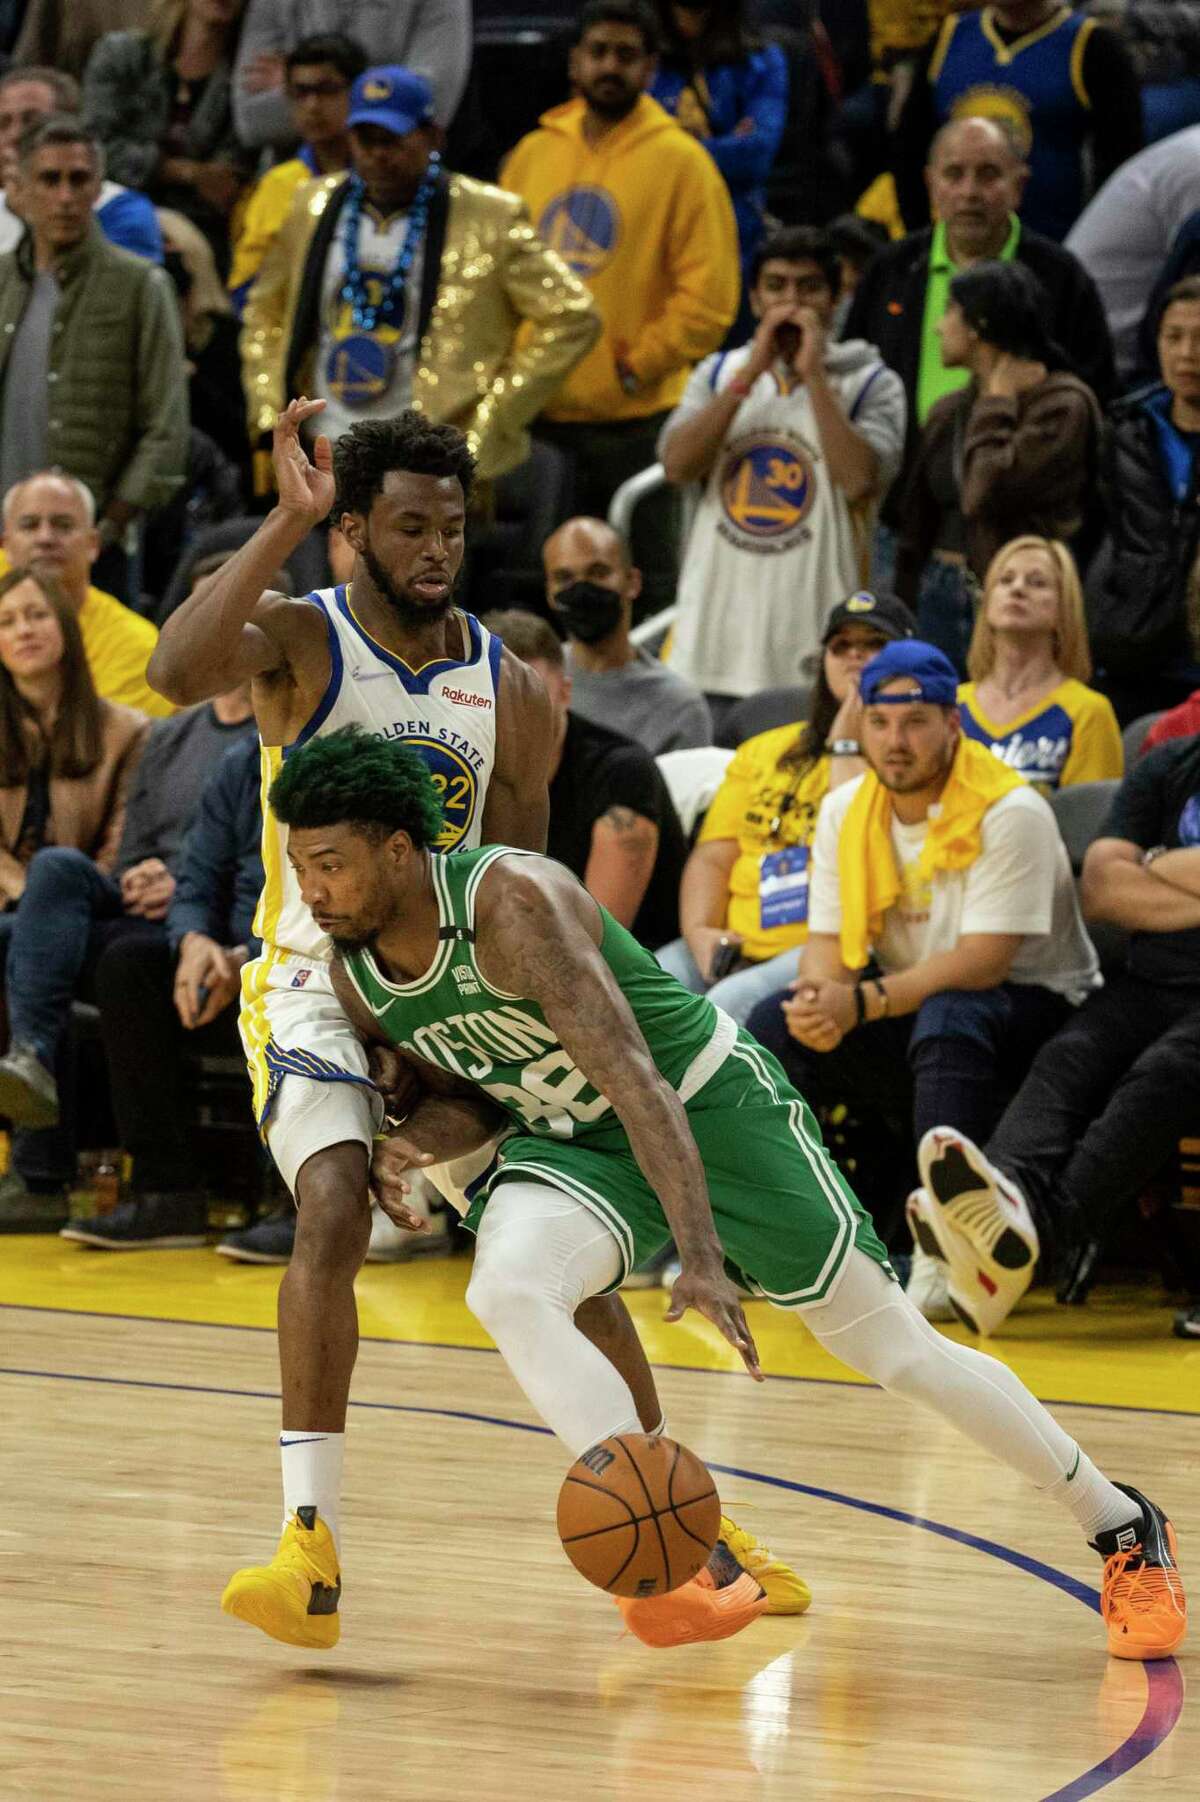 Boston Celtics' guard Marcus Smart drives towards the basket as Golden State Warriors' forward Andrew Wiggins defends during the fourth quarter in Game 1 of the NBA Finals at Chase Center in San Francisco, Calif. Thursday, June 2, 2022. The Celtics defeated the Warriors 120-108.